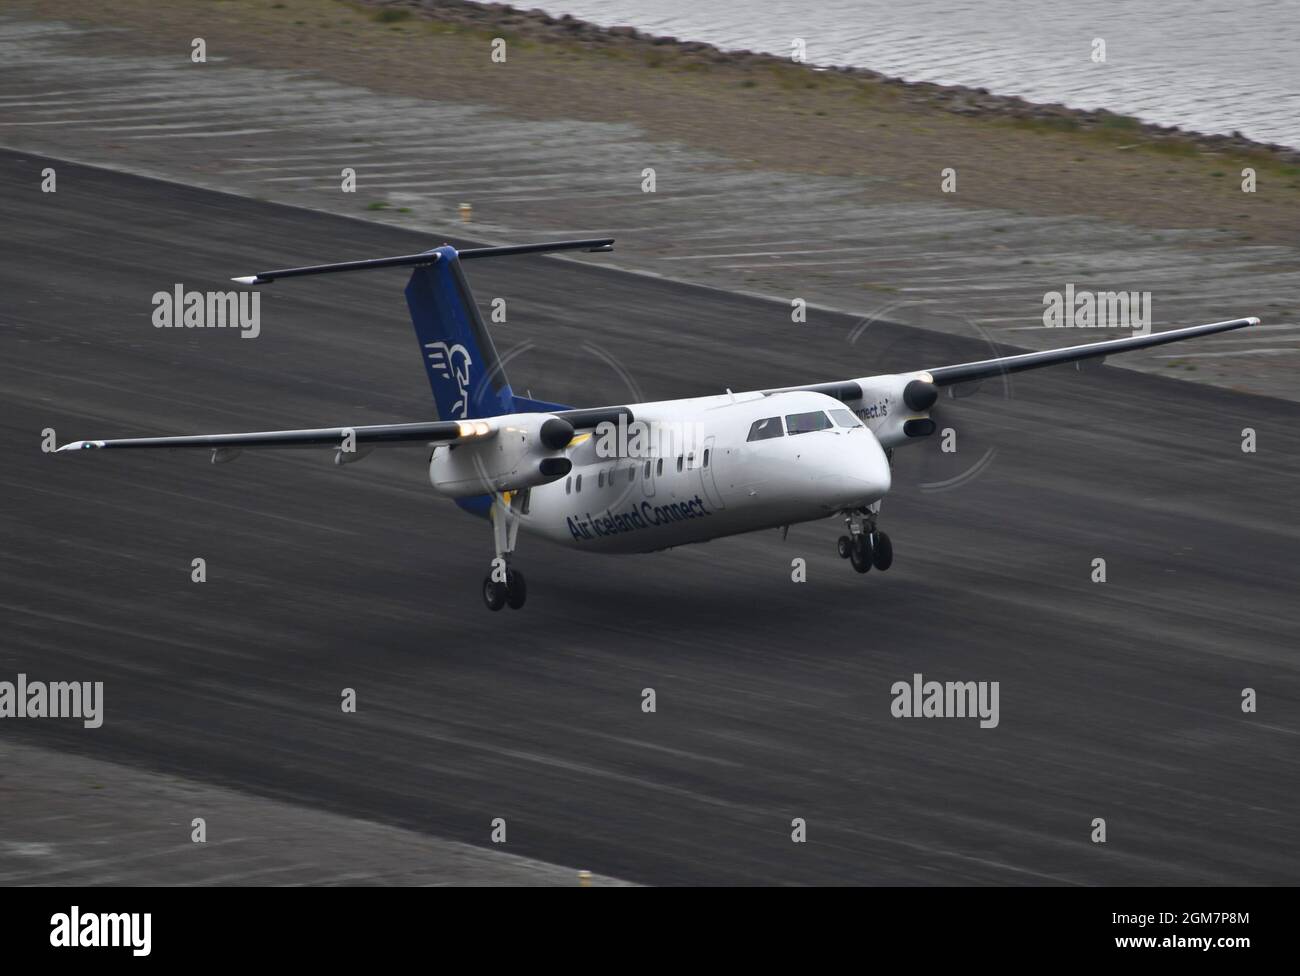 Air Iceland Connect Dash8-200 taking off from Isafjördur airport Stock Photo